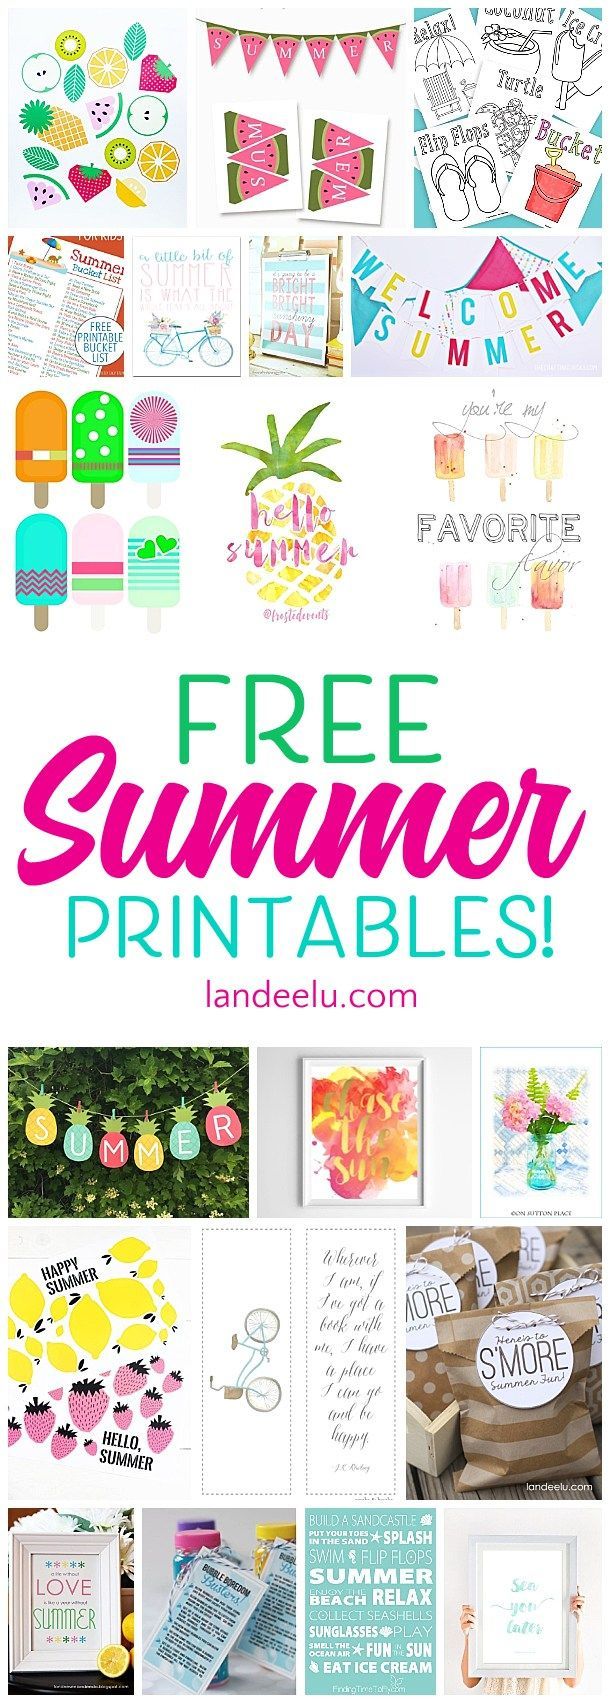 Awesome collection of free summer printables!  Games, banners, bucket lists and more.  So fun!